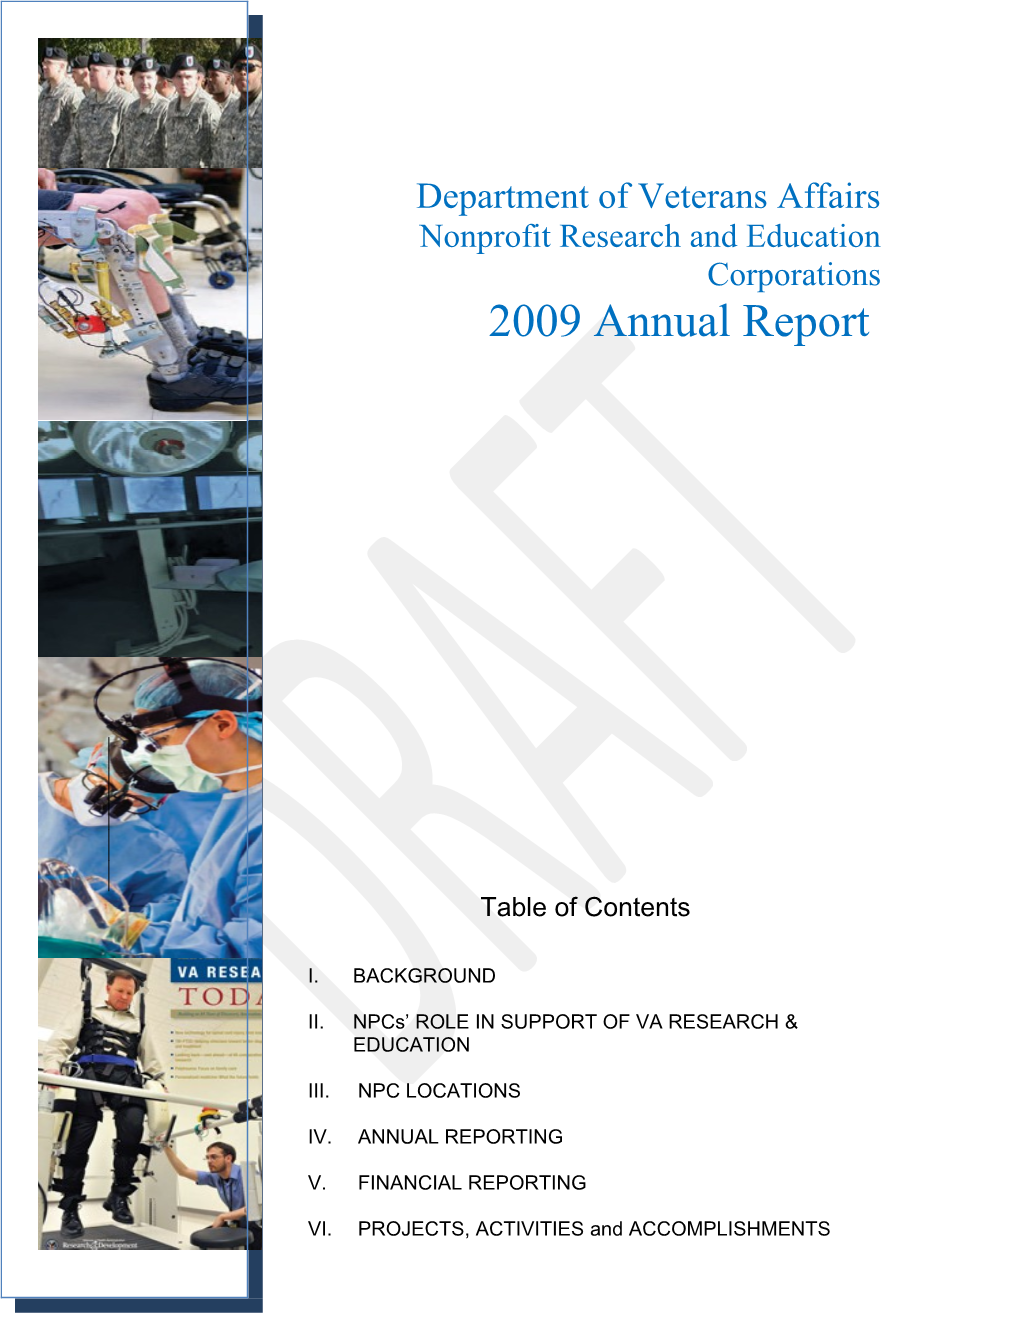 DVA: Nonprofit Research And Education Corporations 2009 Annual Report